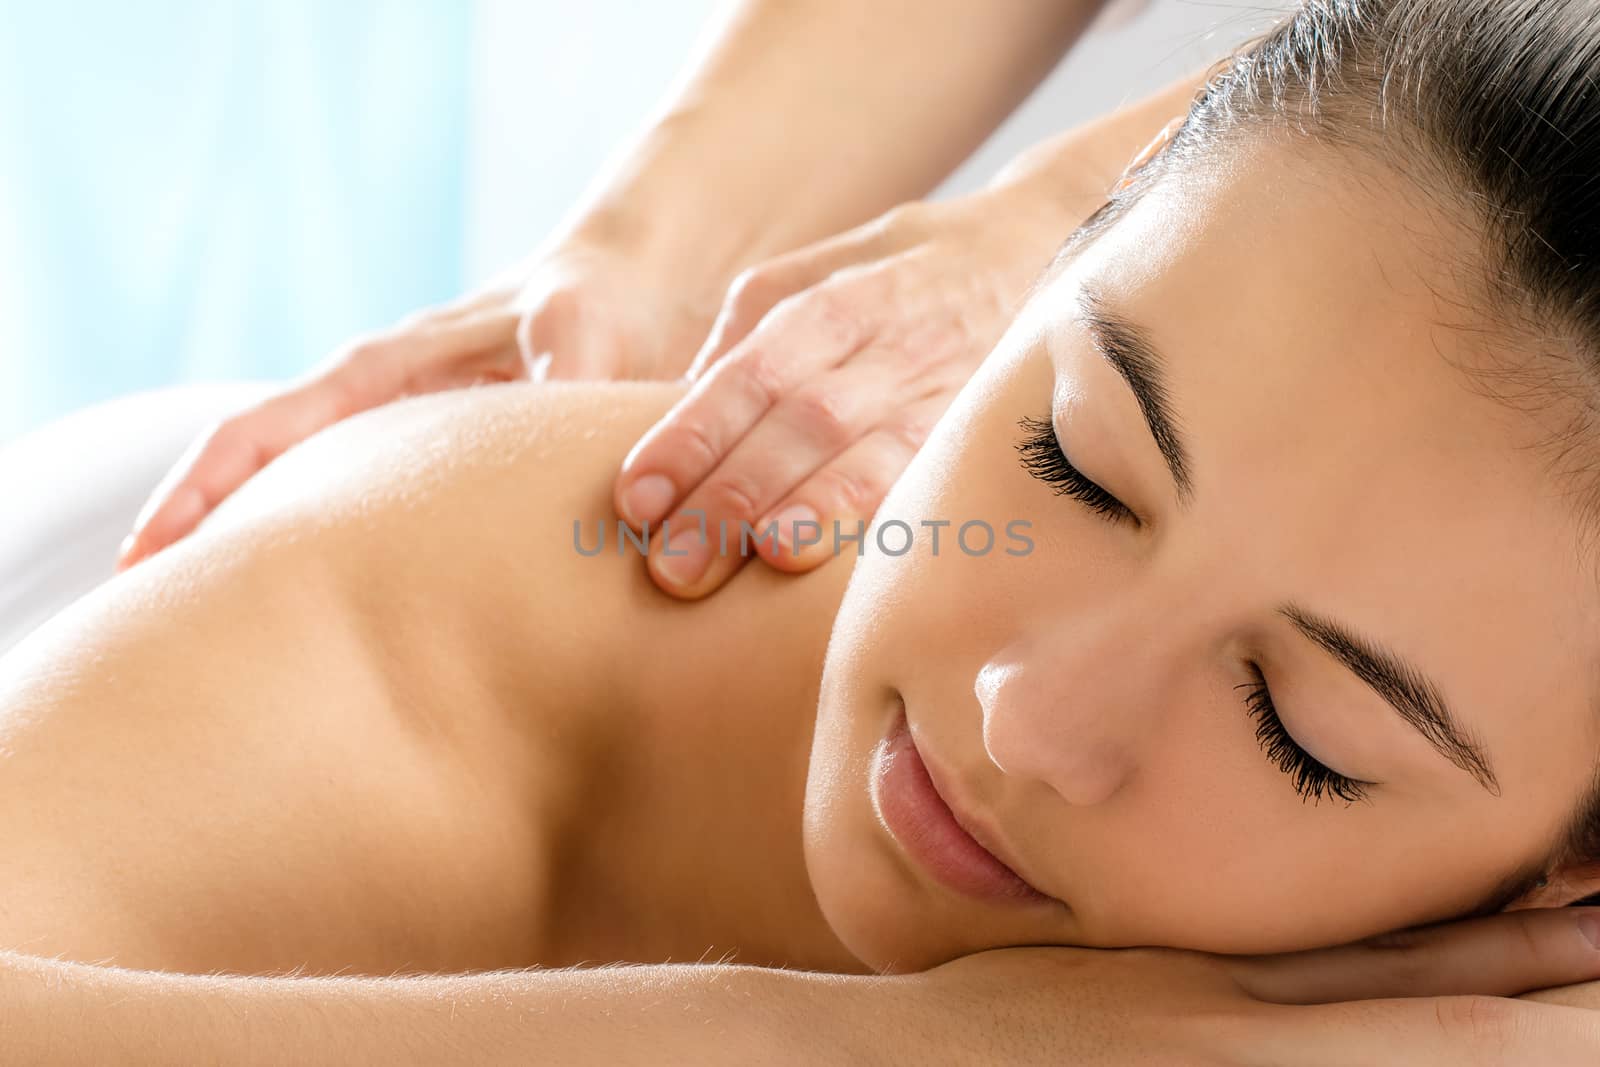 Close up portrait of young woman relaxing in spa.Therapist doing back massage on girl in background.